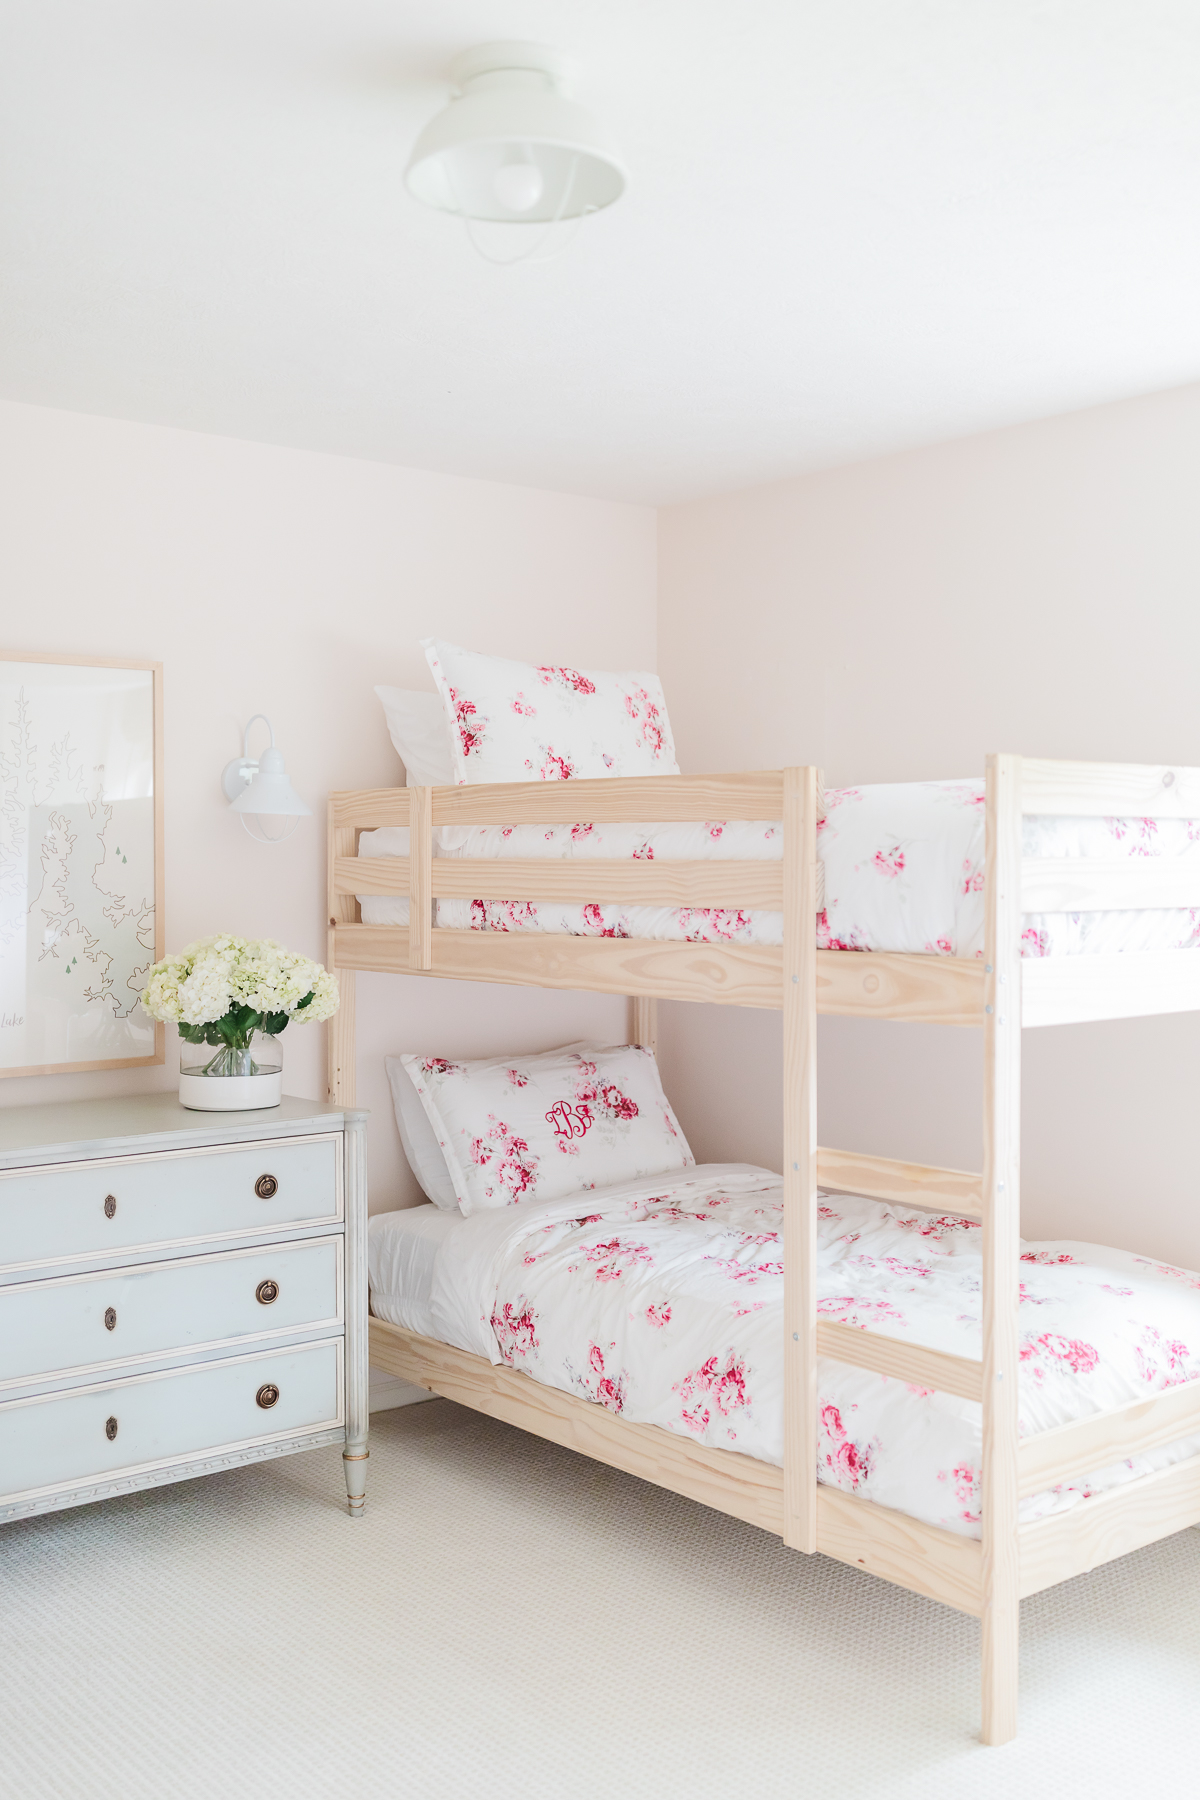 pink bedroom with bunk beds, floral bedding and blue chest of drawers